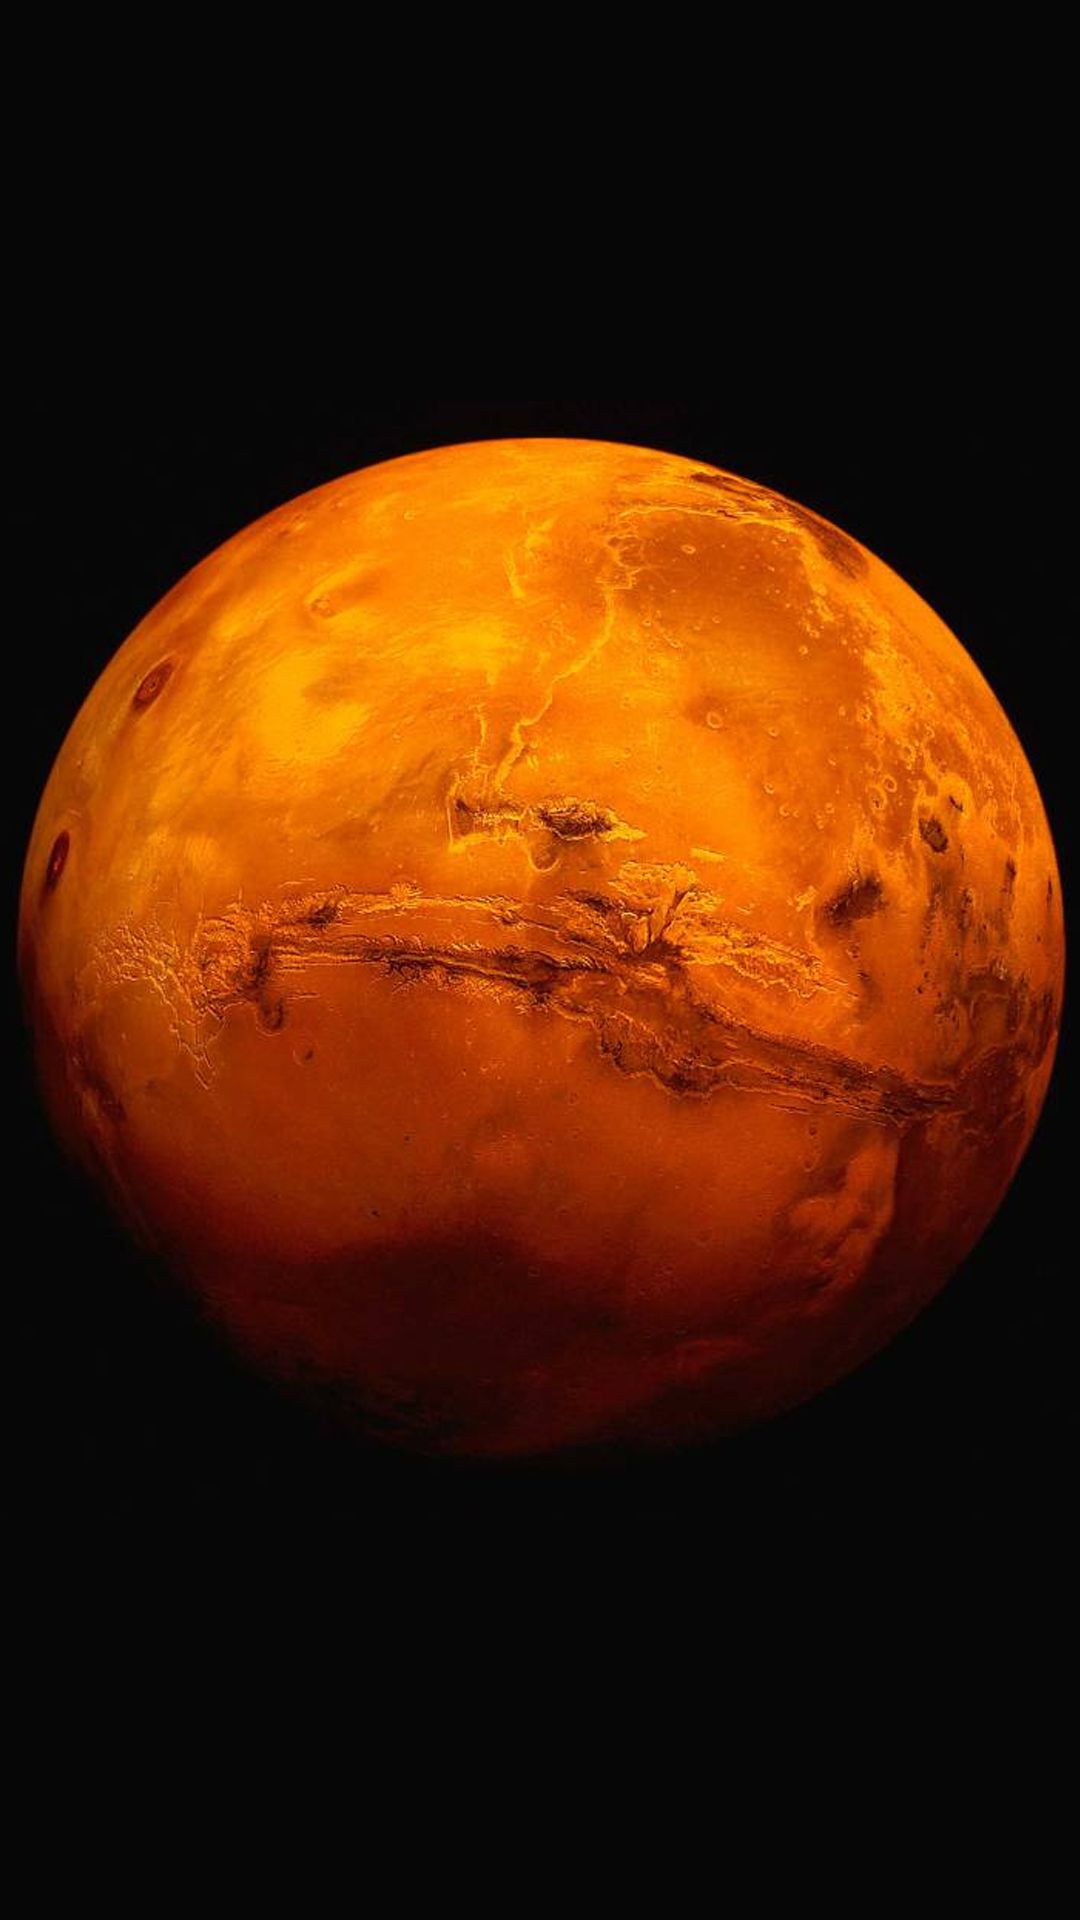 mars iphone wallpaper,planet,orange,atmosphere,astronomical object,earth